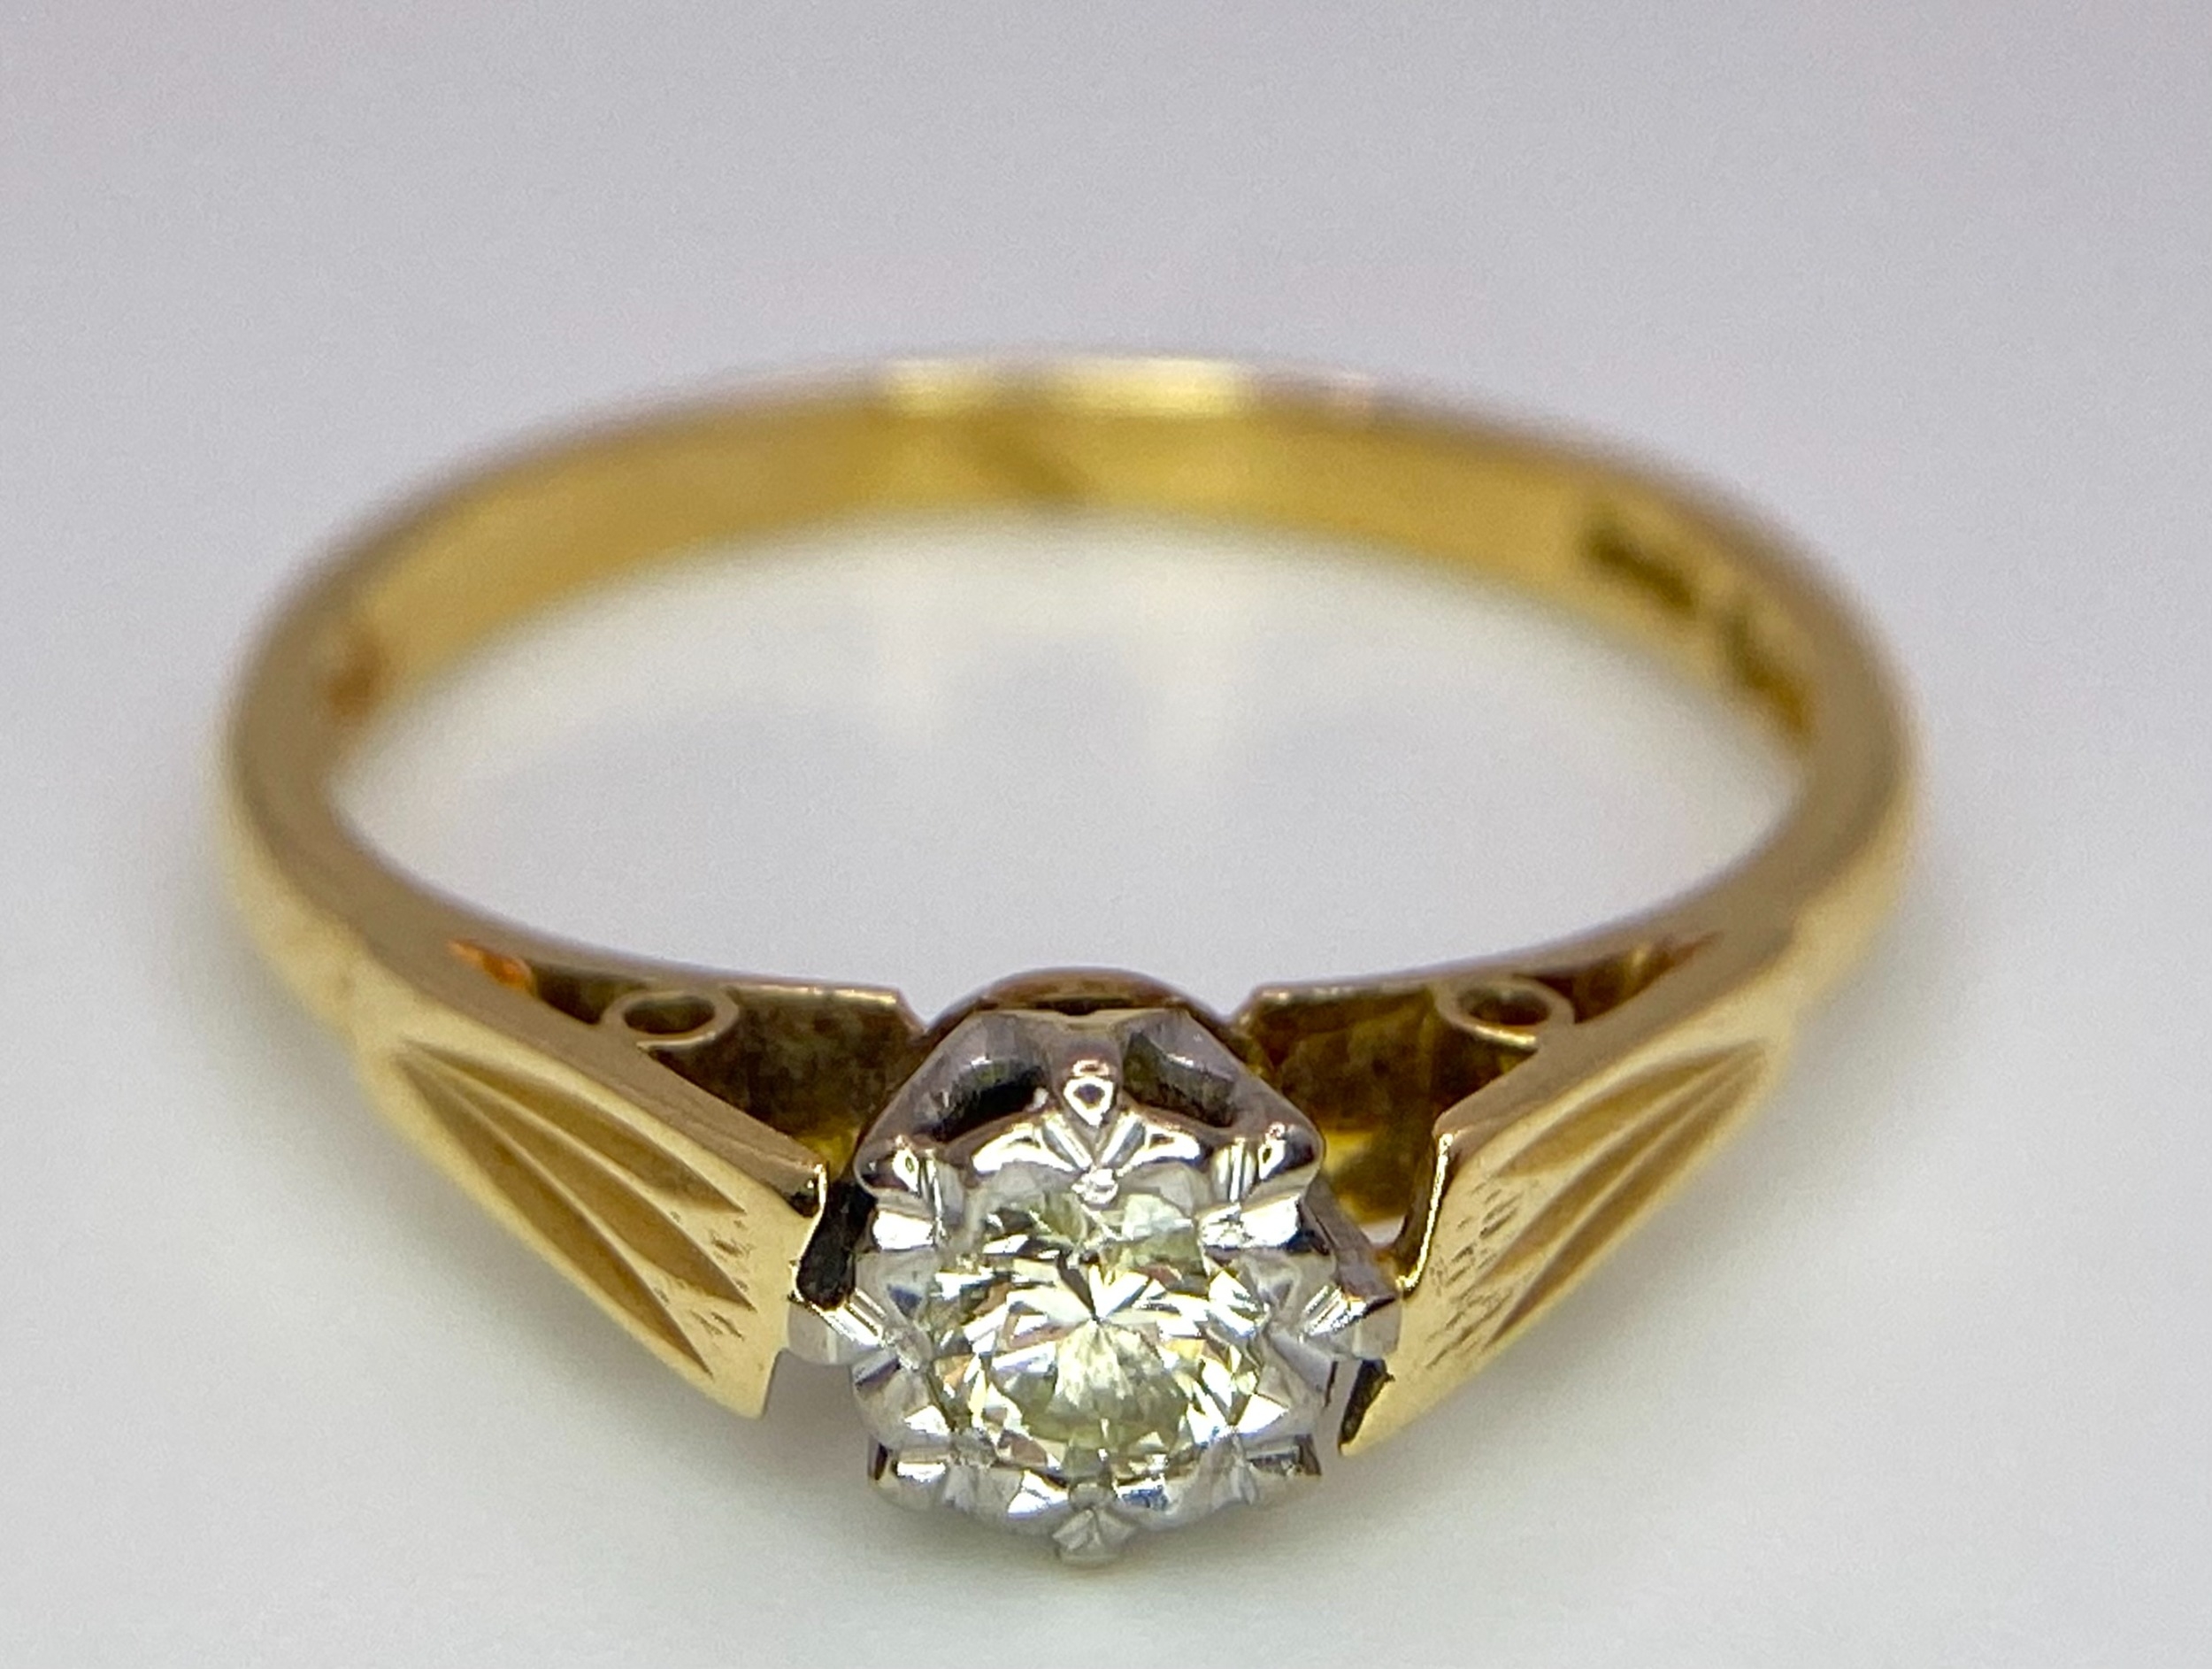 A VINTAGE 18K YELLOW GOLD DIAMOND SOLITAIRE RING. 0.15CT. 2.6G. SIZE L 1/2. - Image 3 of 6